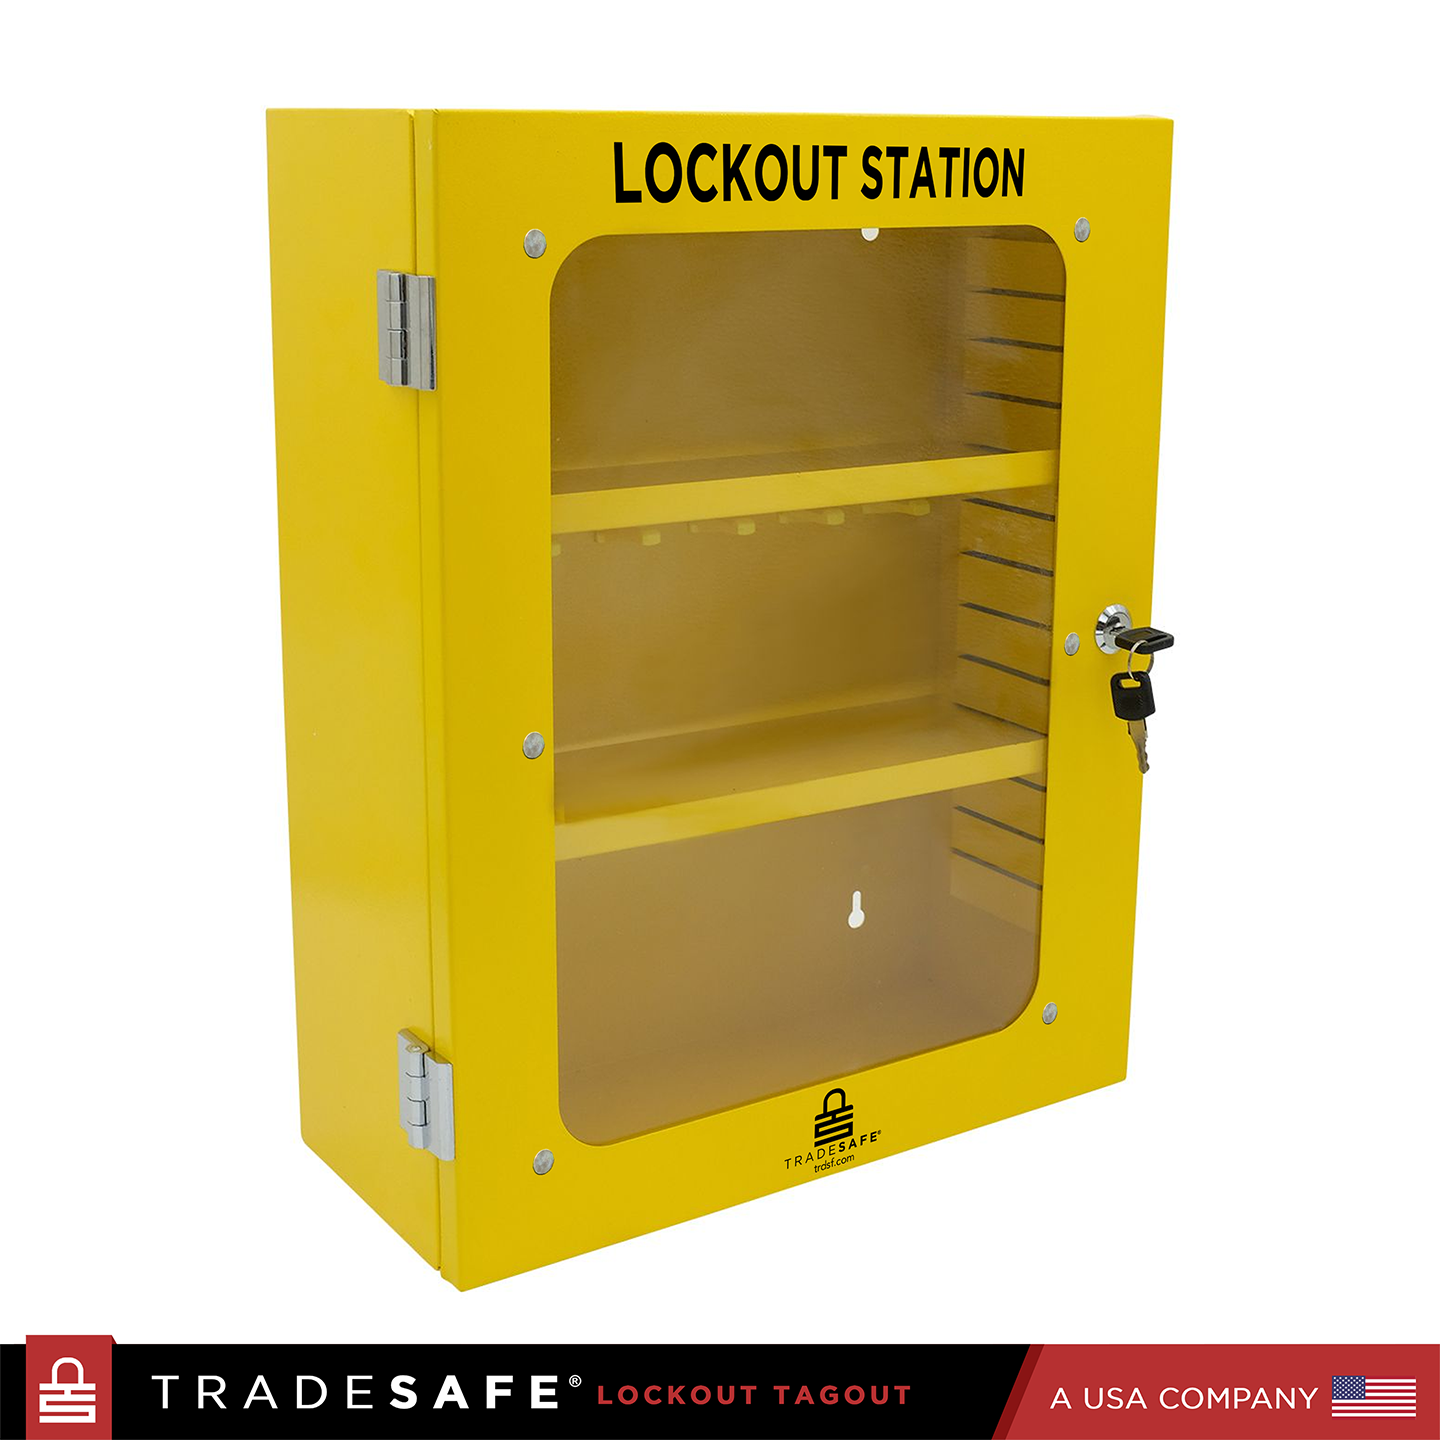 slanted view of an empty yellow lockout tagout station